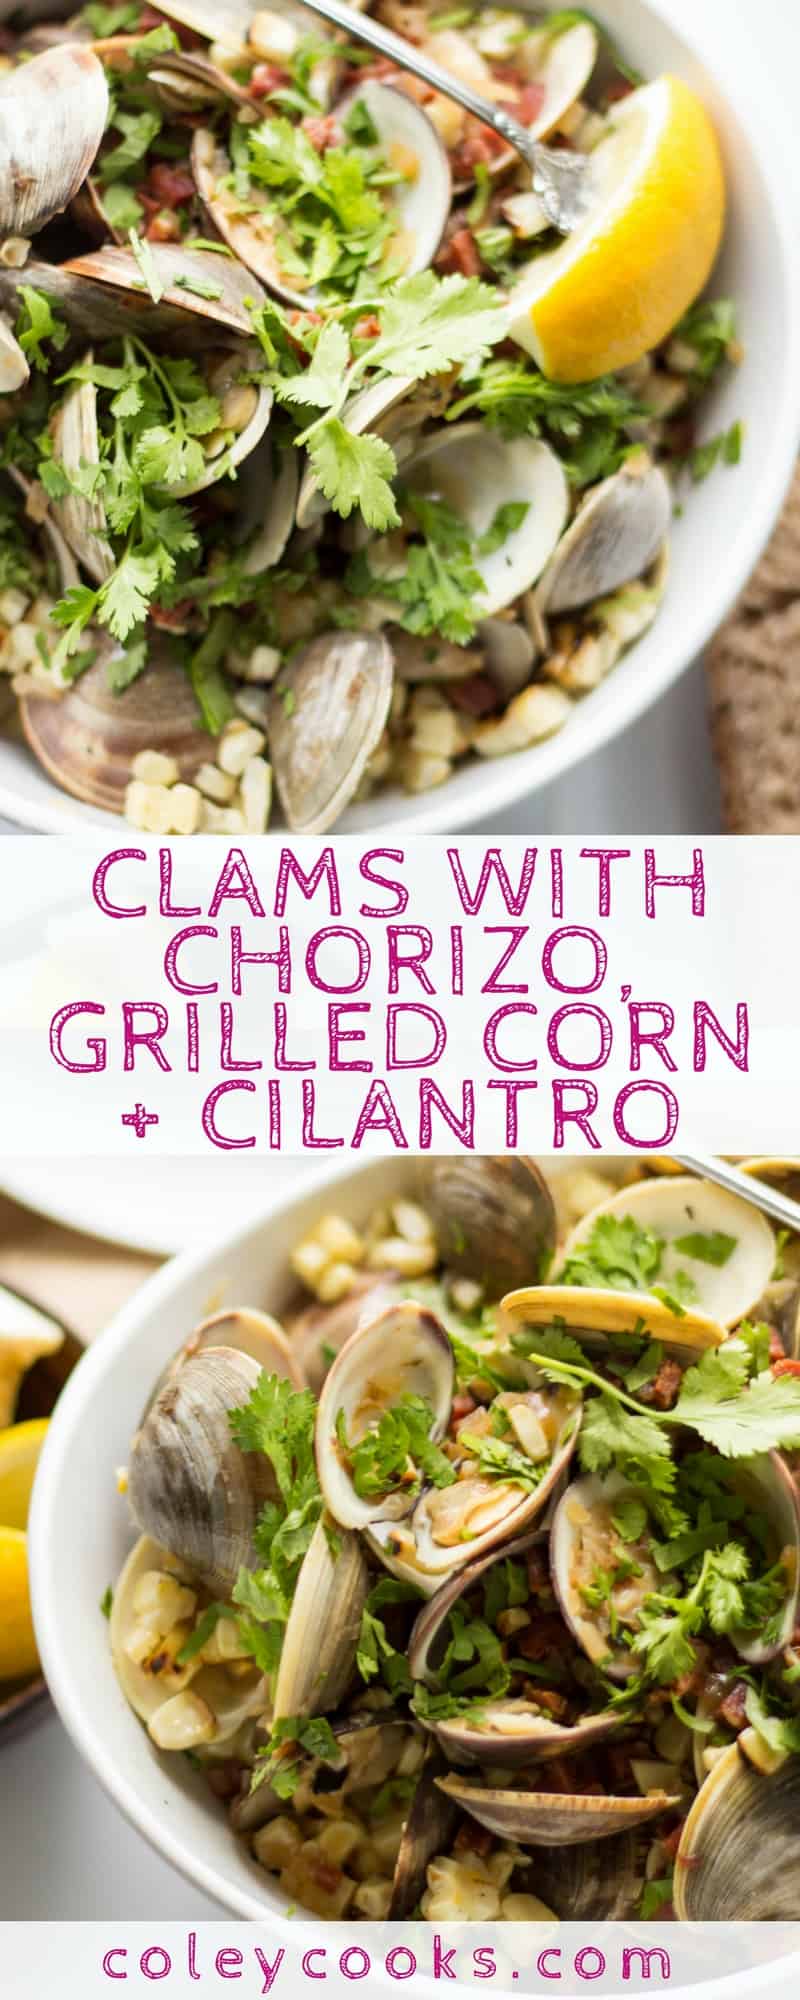 CLAMS with CHORIZO, GRILLED CORN + CILANTRO | Steamed clams with spicy Spanish chorizo, sweet grilled corn, and fresh cilantro! Makes the best summer appetizer or dinner! #glutenfree | ColeyCooks.com